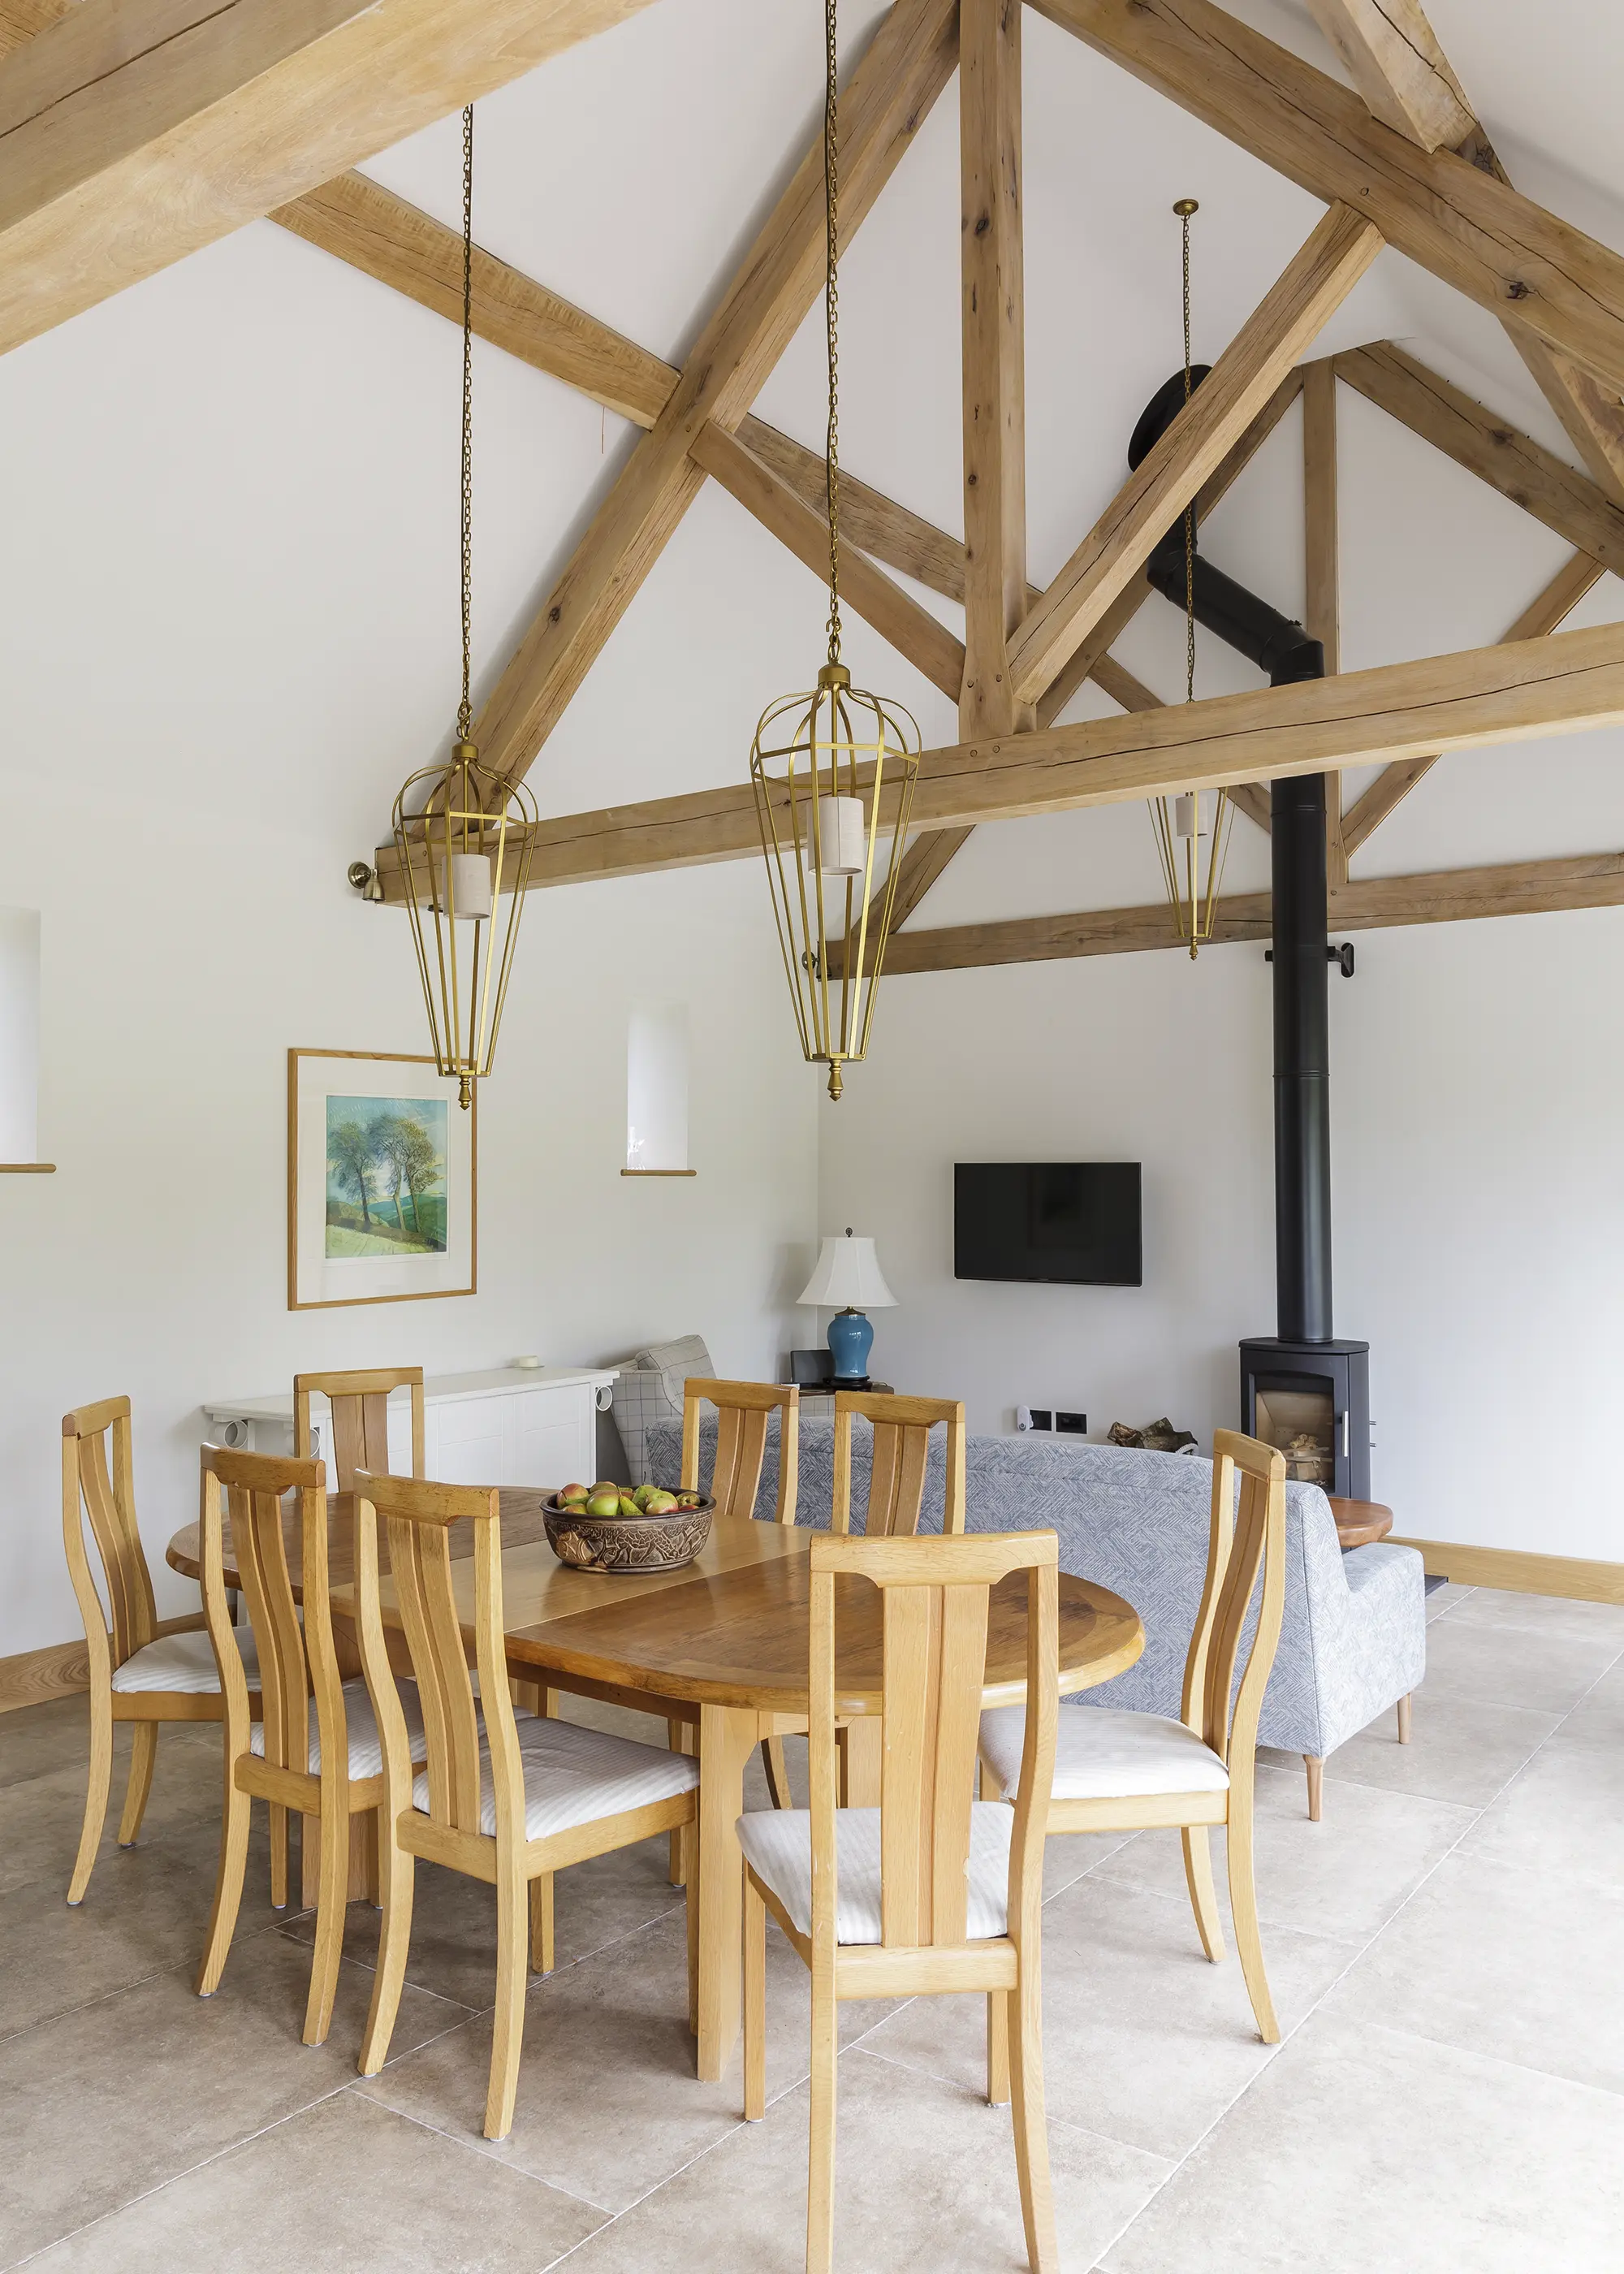 Sympathetic Barn-Style Self Build Home in Gloucestershire